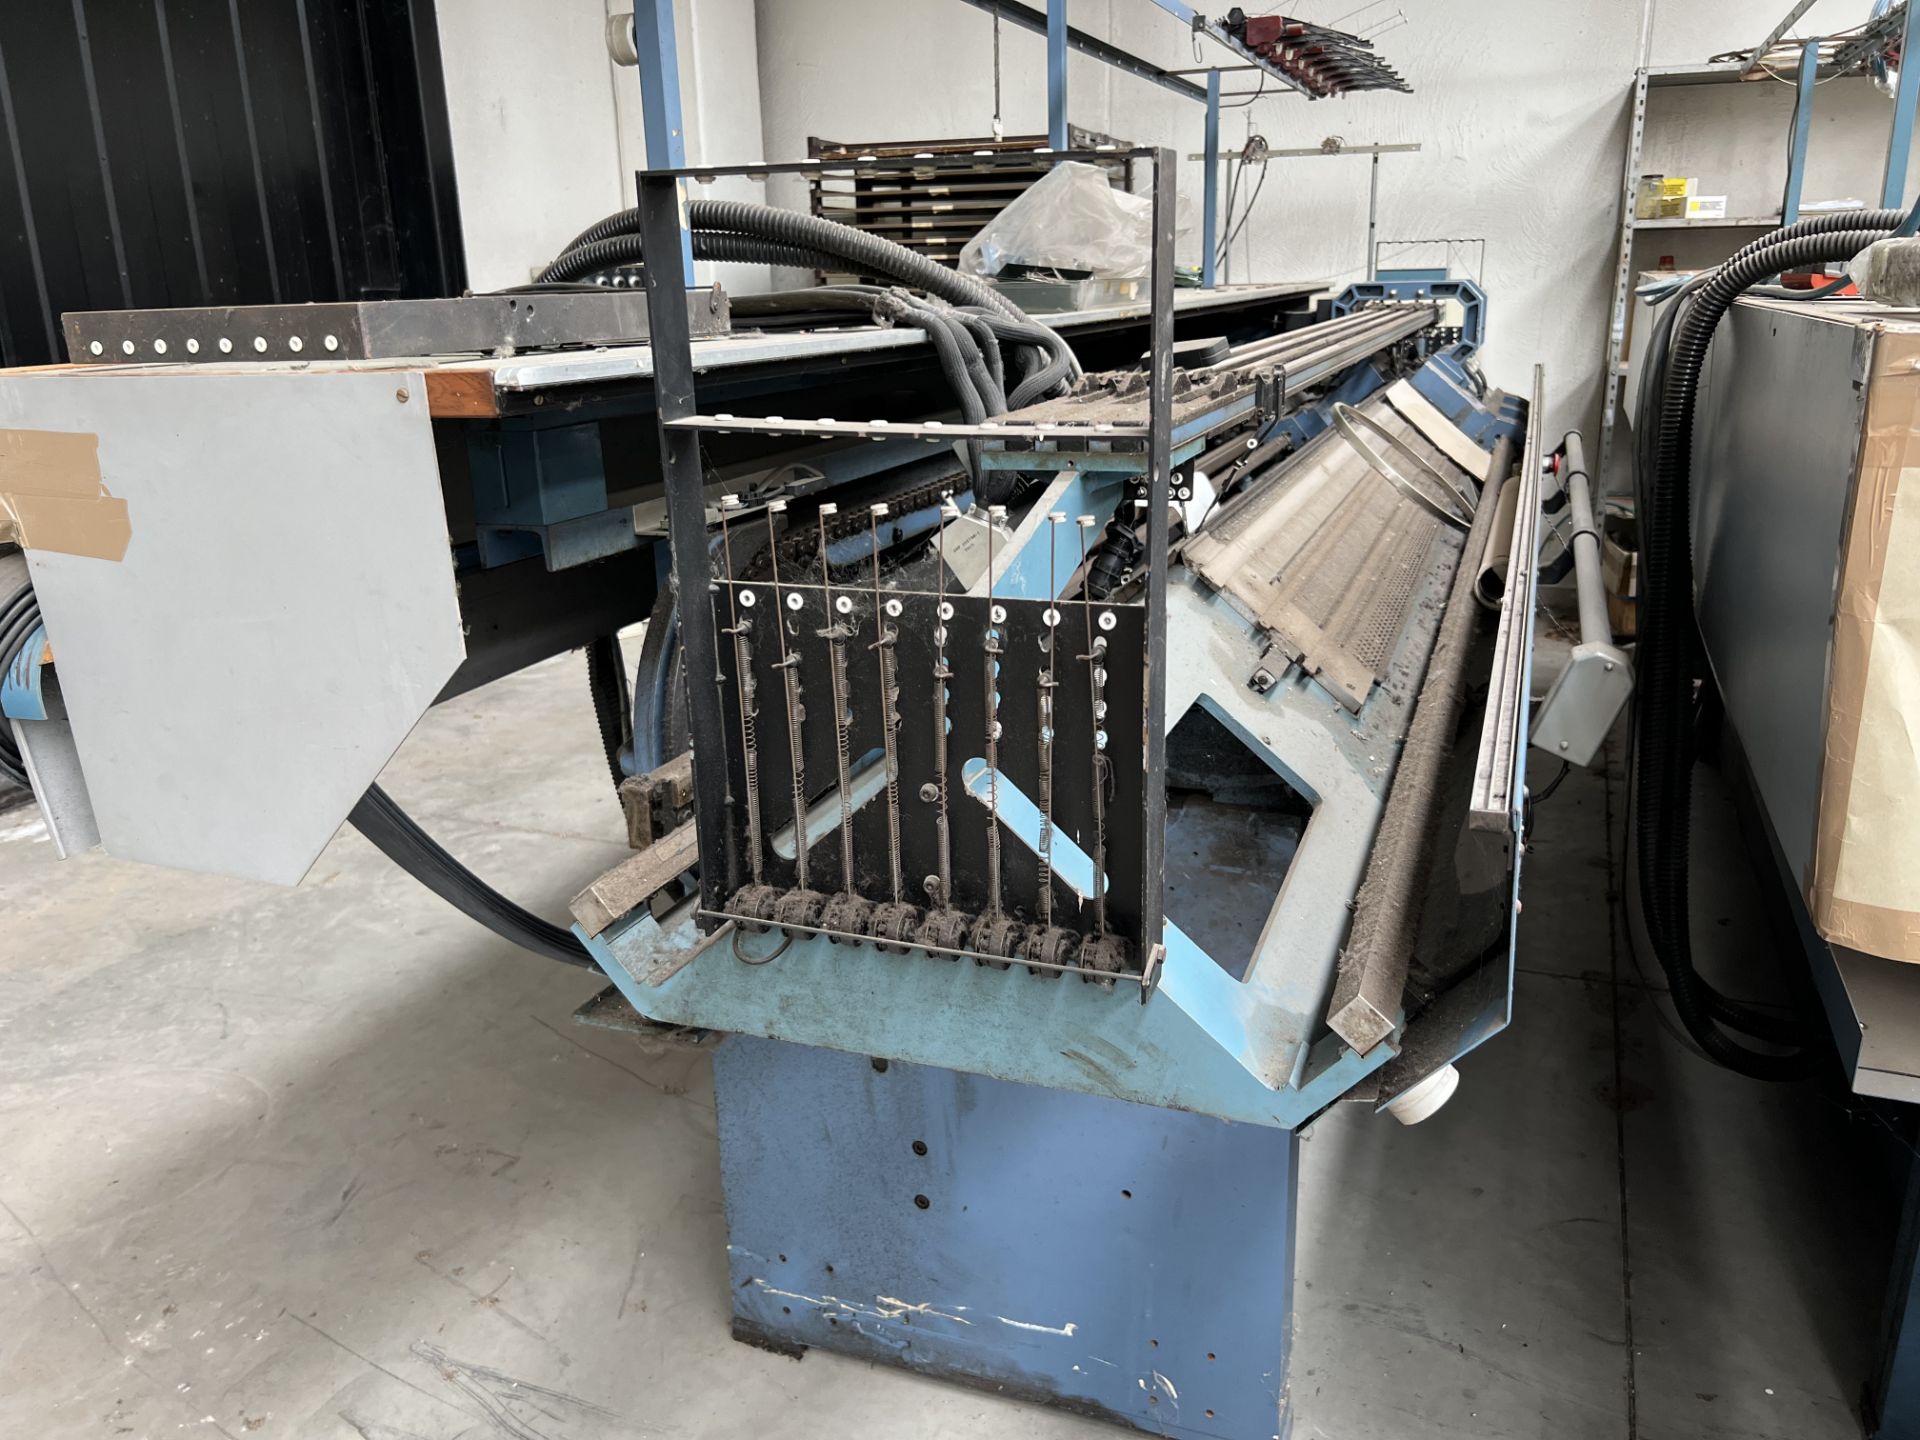 Omega Flat Bed Knitting Machines, Various Types and Bed Length Machines - Image 13 of 13